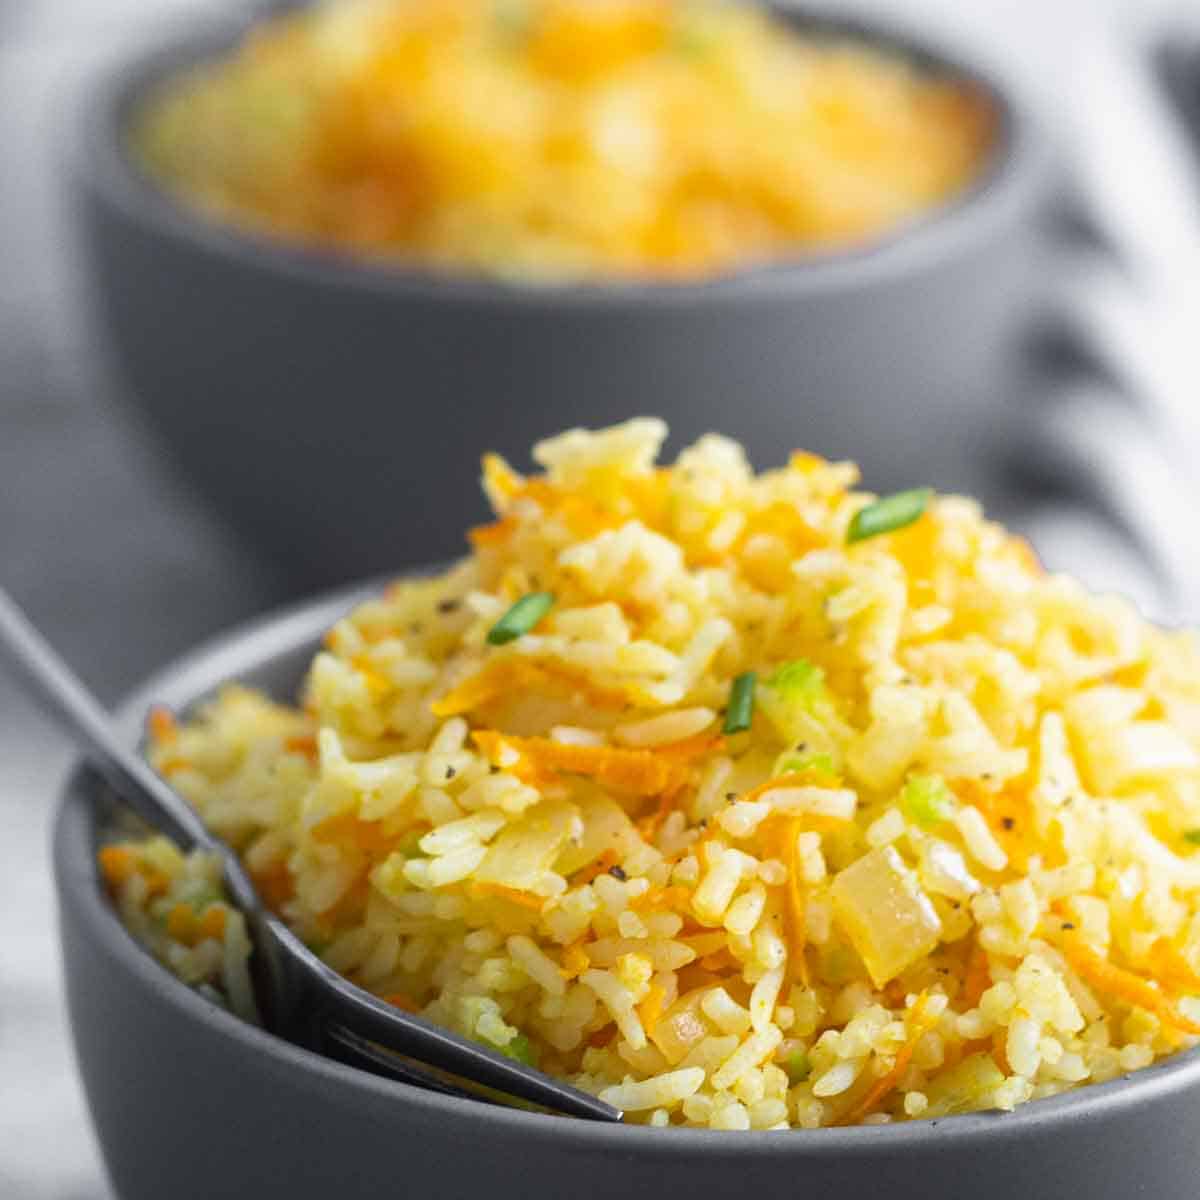 two bowls served with rice and carrots